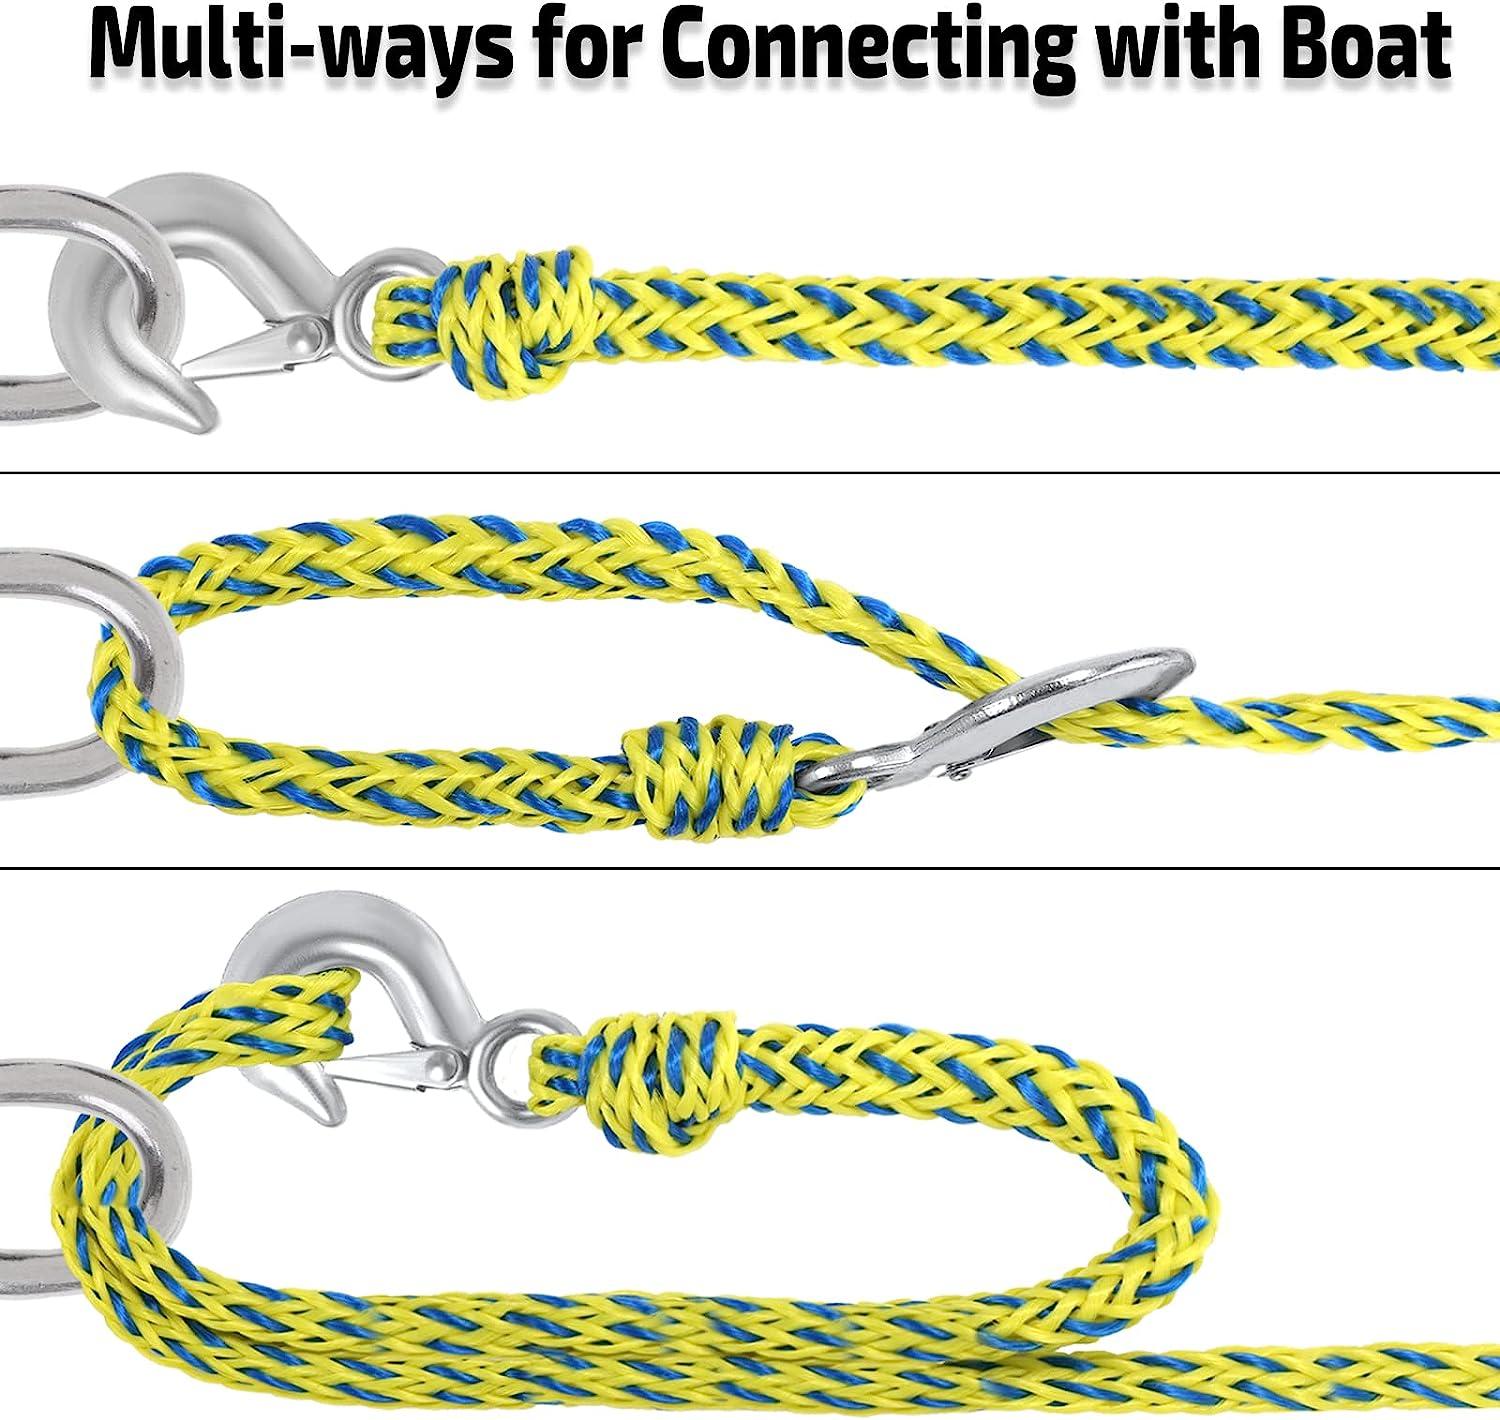 Swonder Boat Tow Harness for Tubing, 16ft Boat Tow Rope for Tubing Ski Tow  Bridle for 4 Riders Towable Tube, Tube Tow Harness with 3/4in Big Hook Size  Fits Most Boats